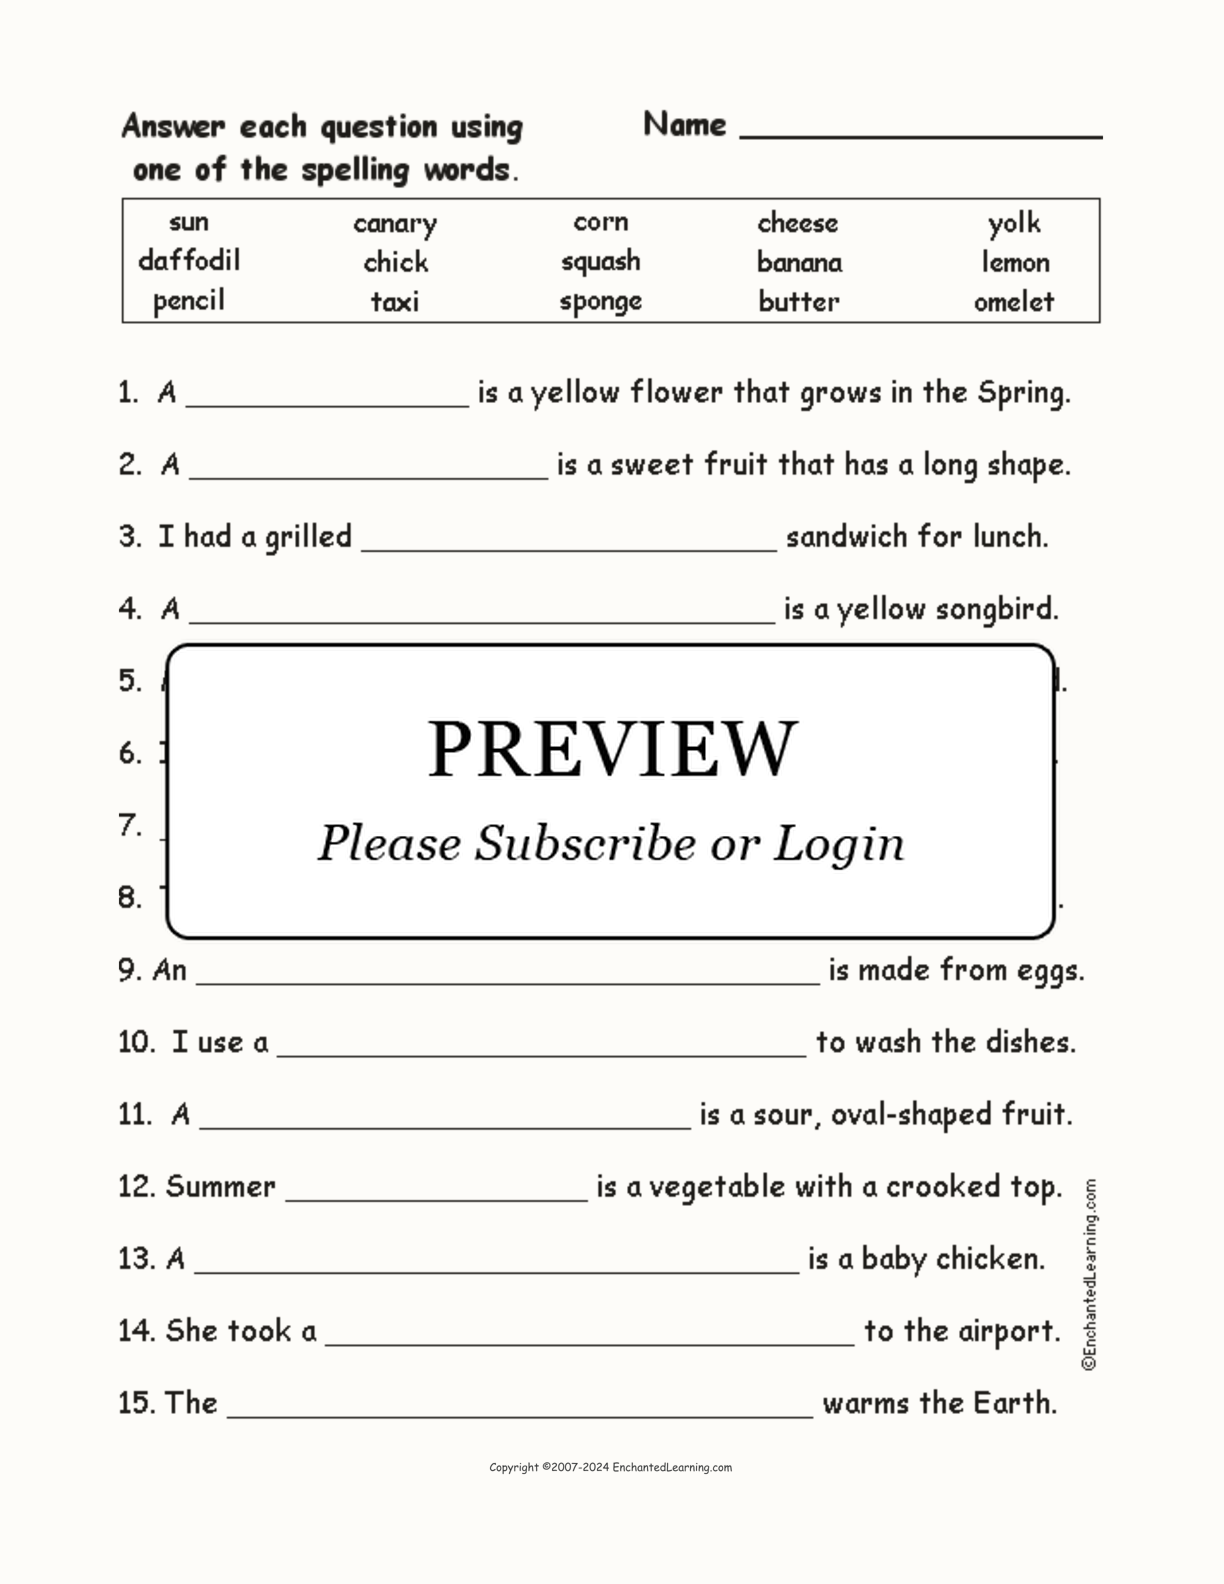 Yellow Things: Spelling Word Questions interactive worksheet page 1